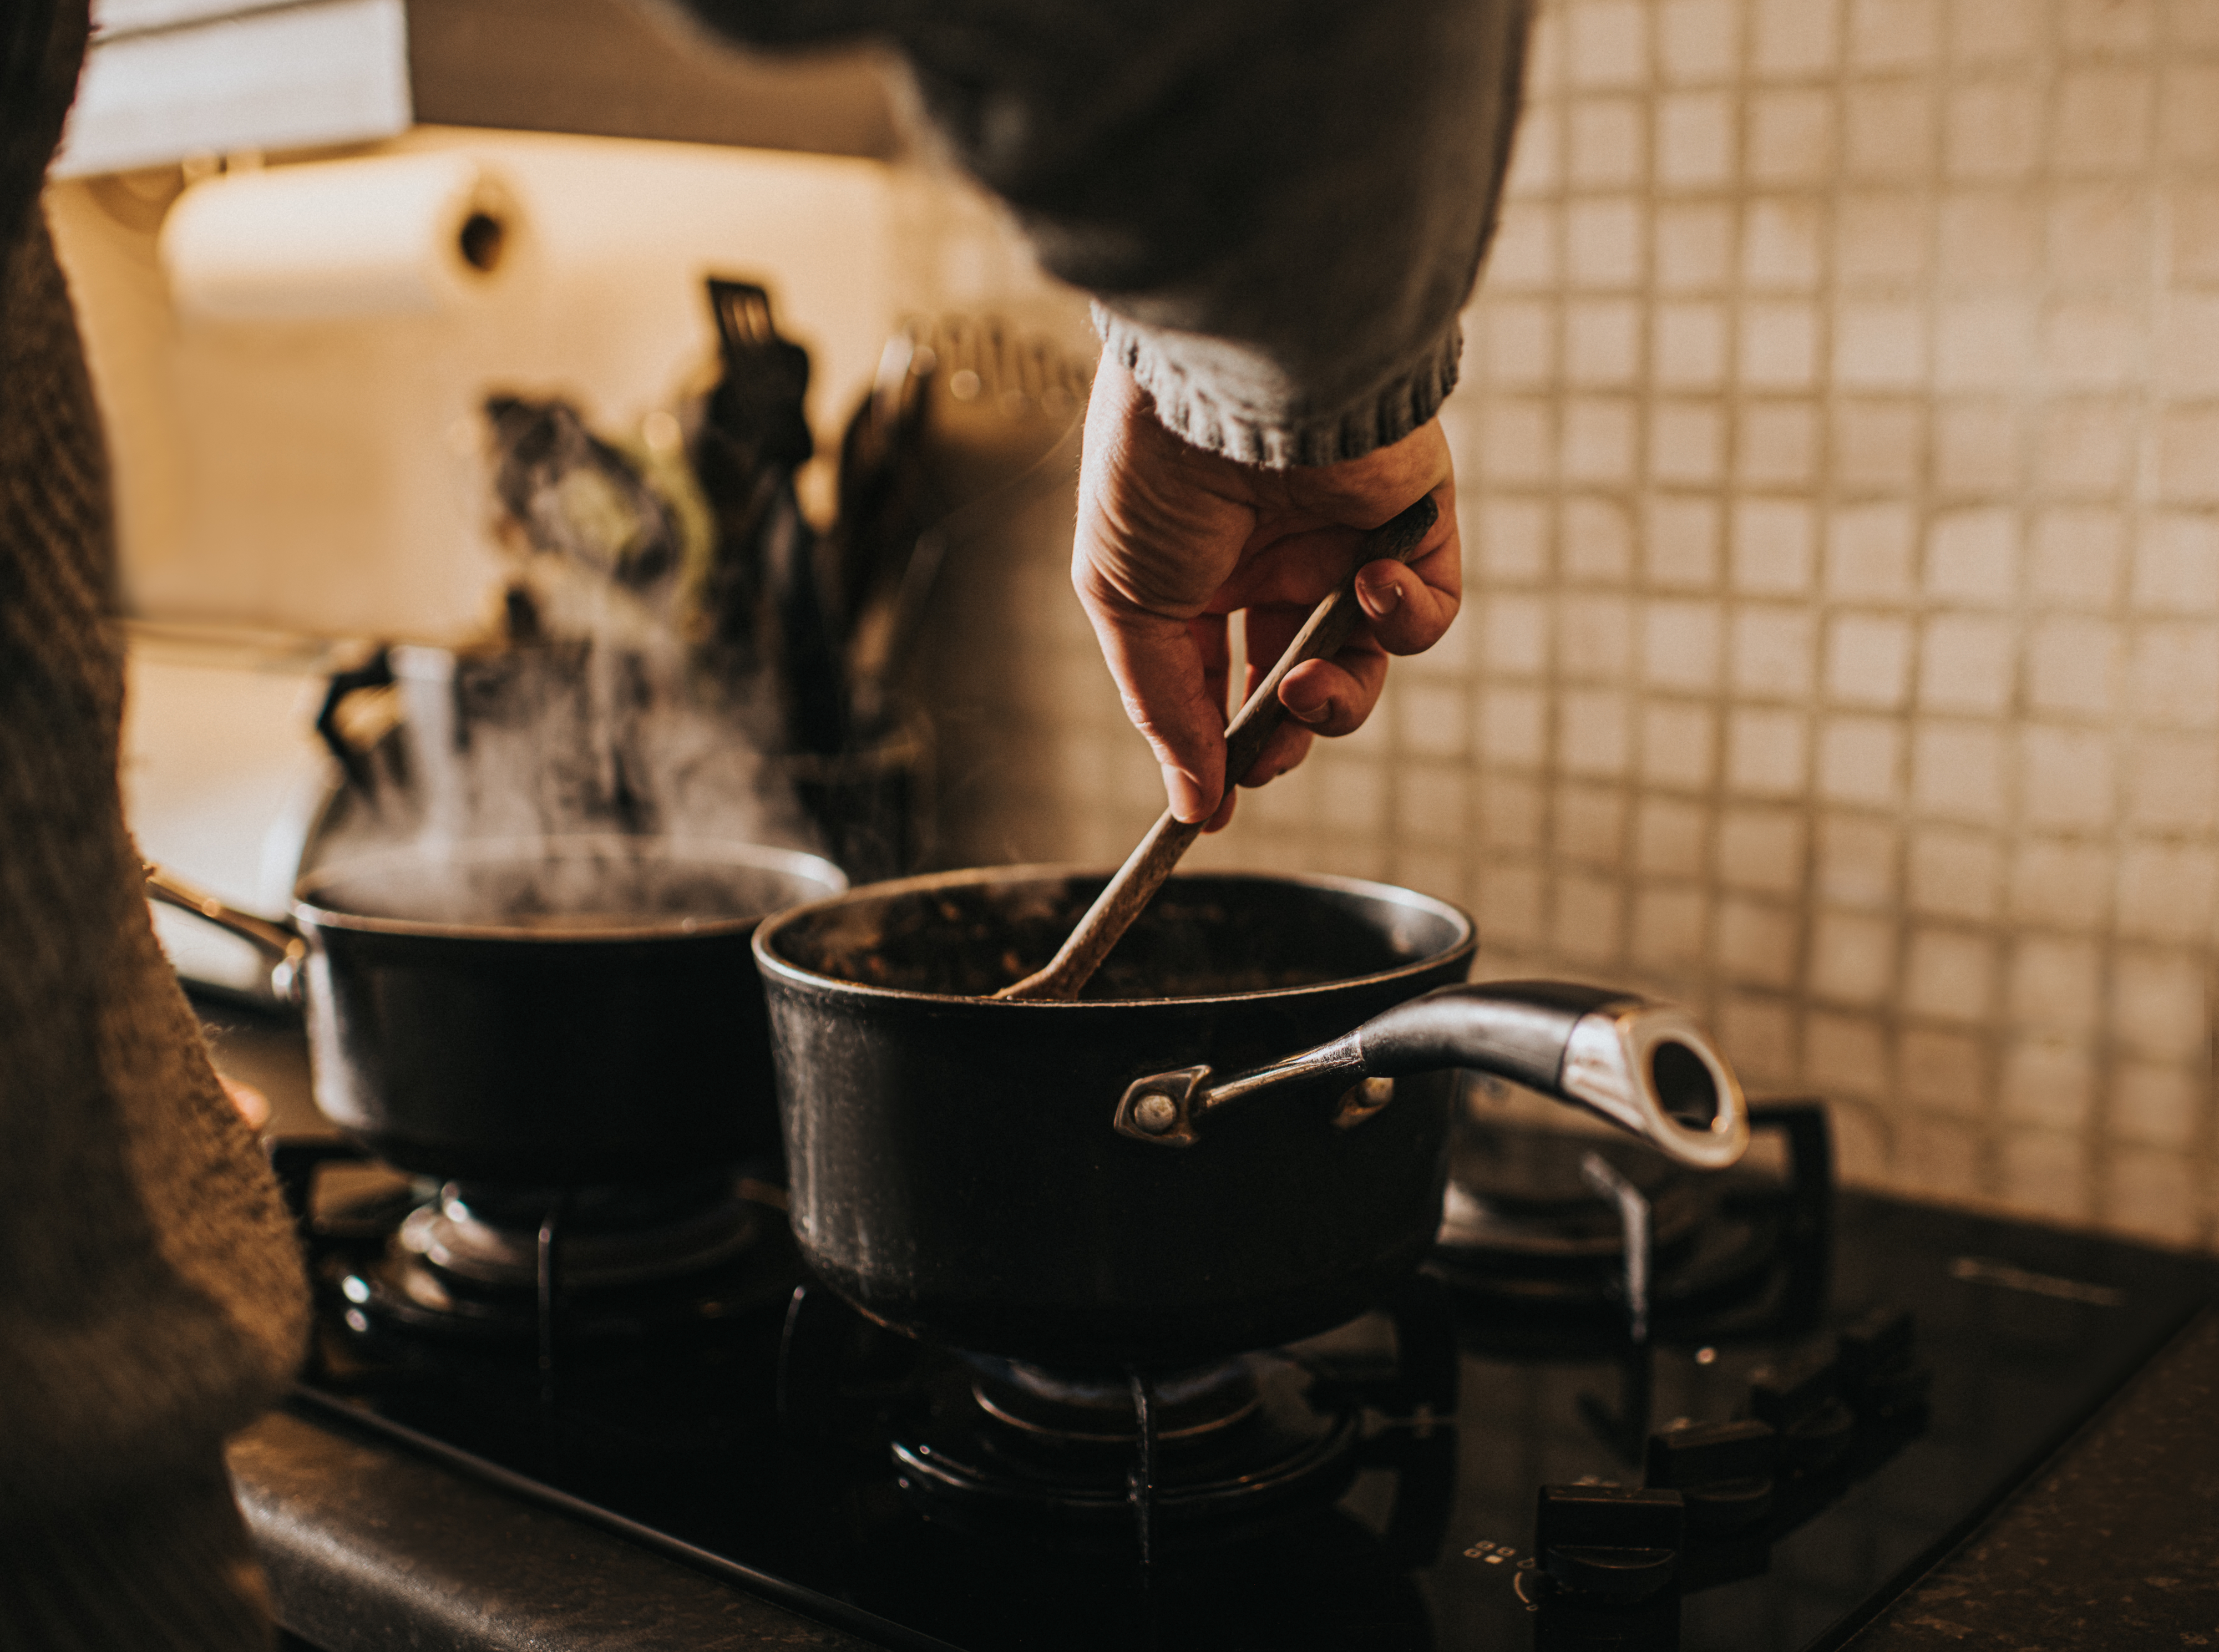 Person cooking, stirring a pot on the stove with steam rising